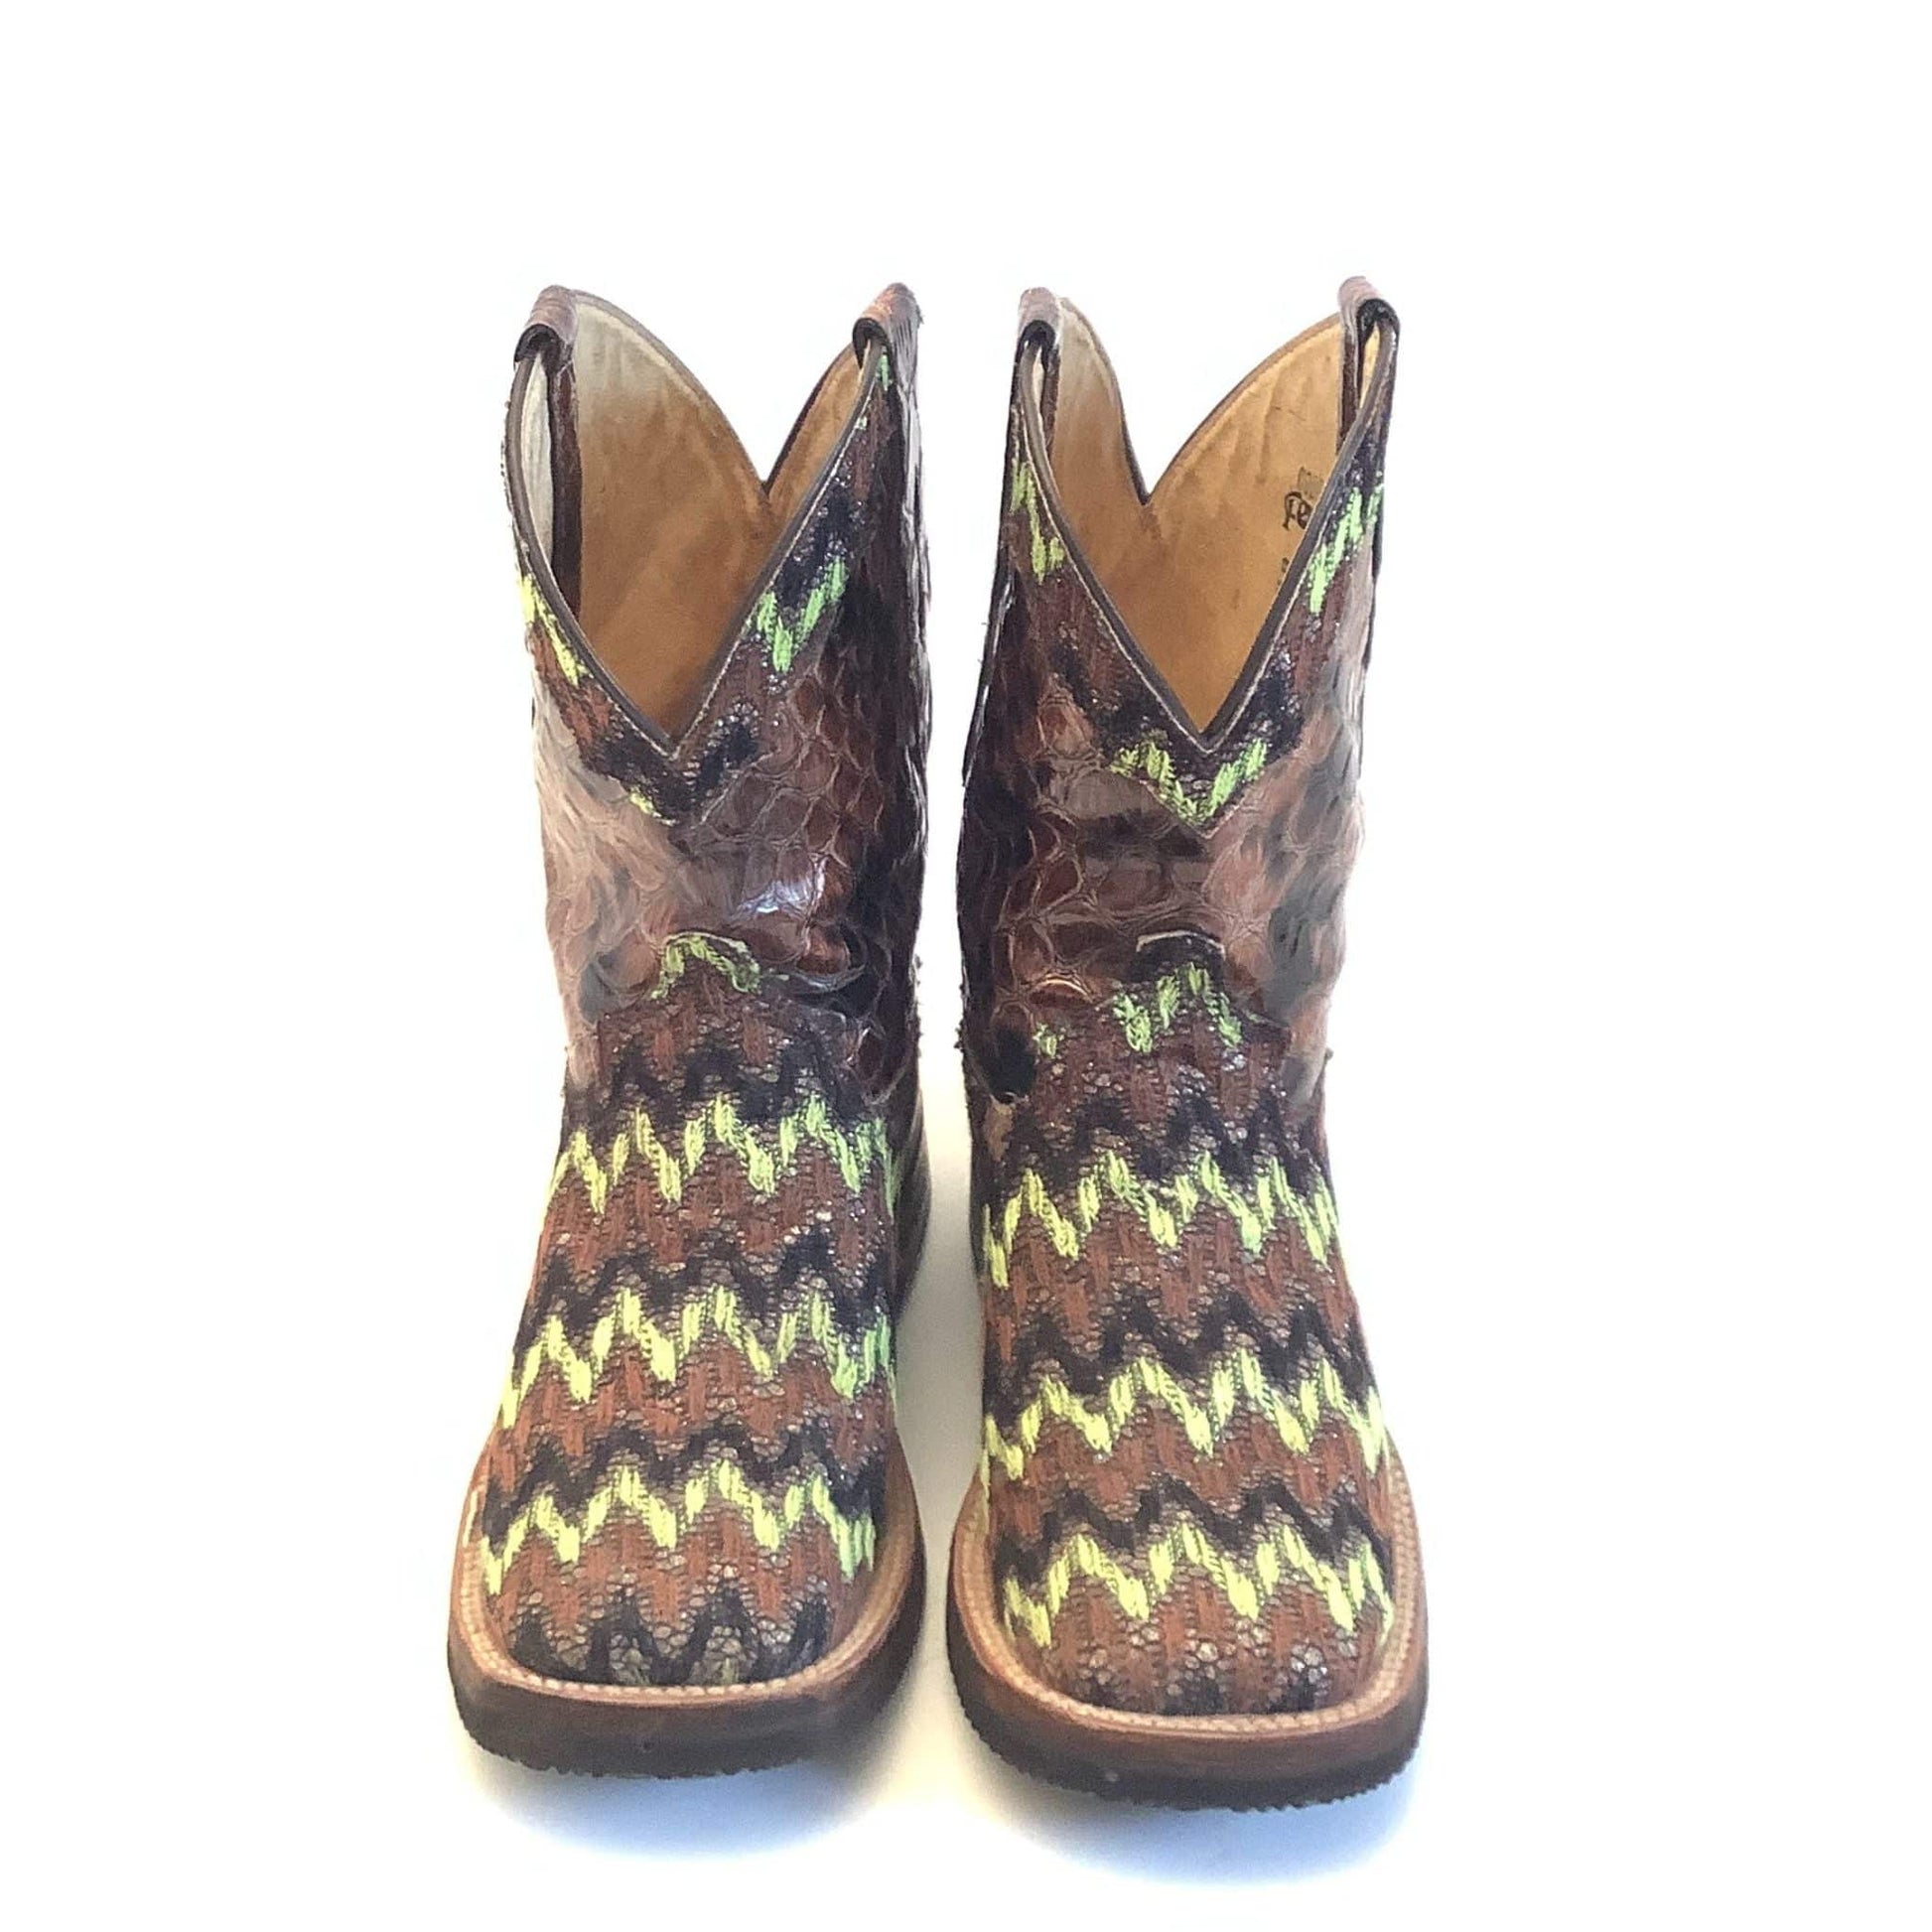 Western Fat-baby Boots 7 / Multi / Y2K - Now